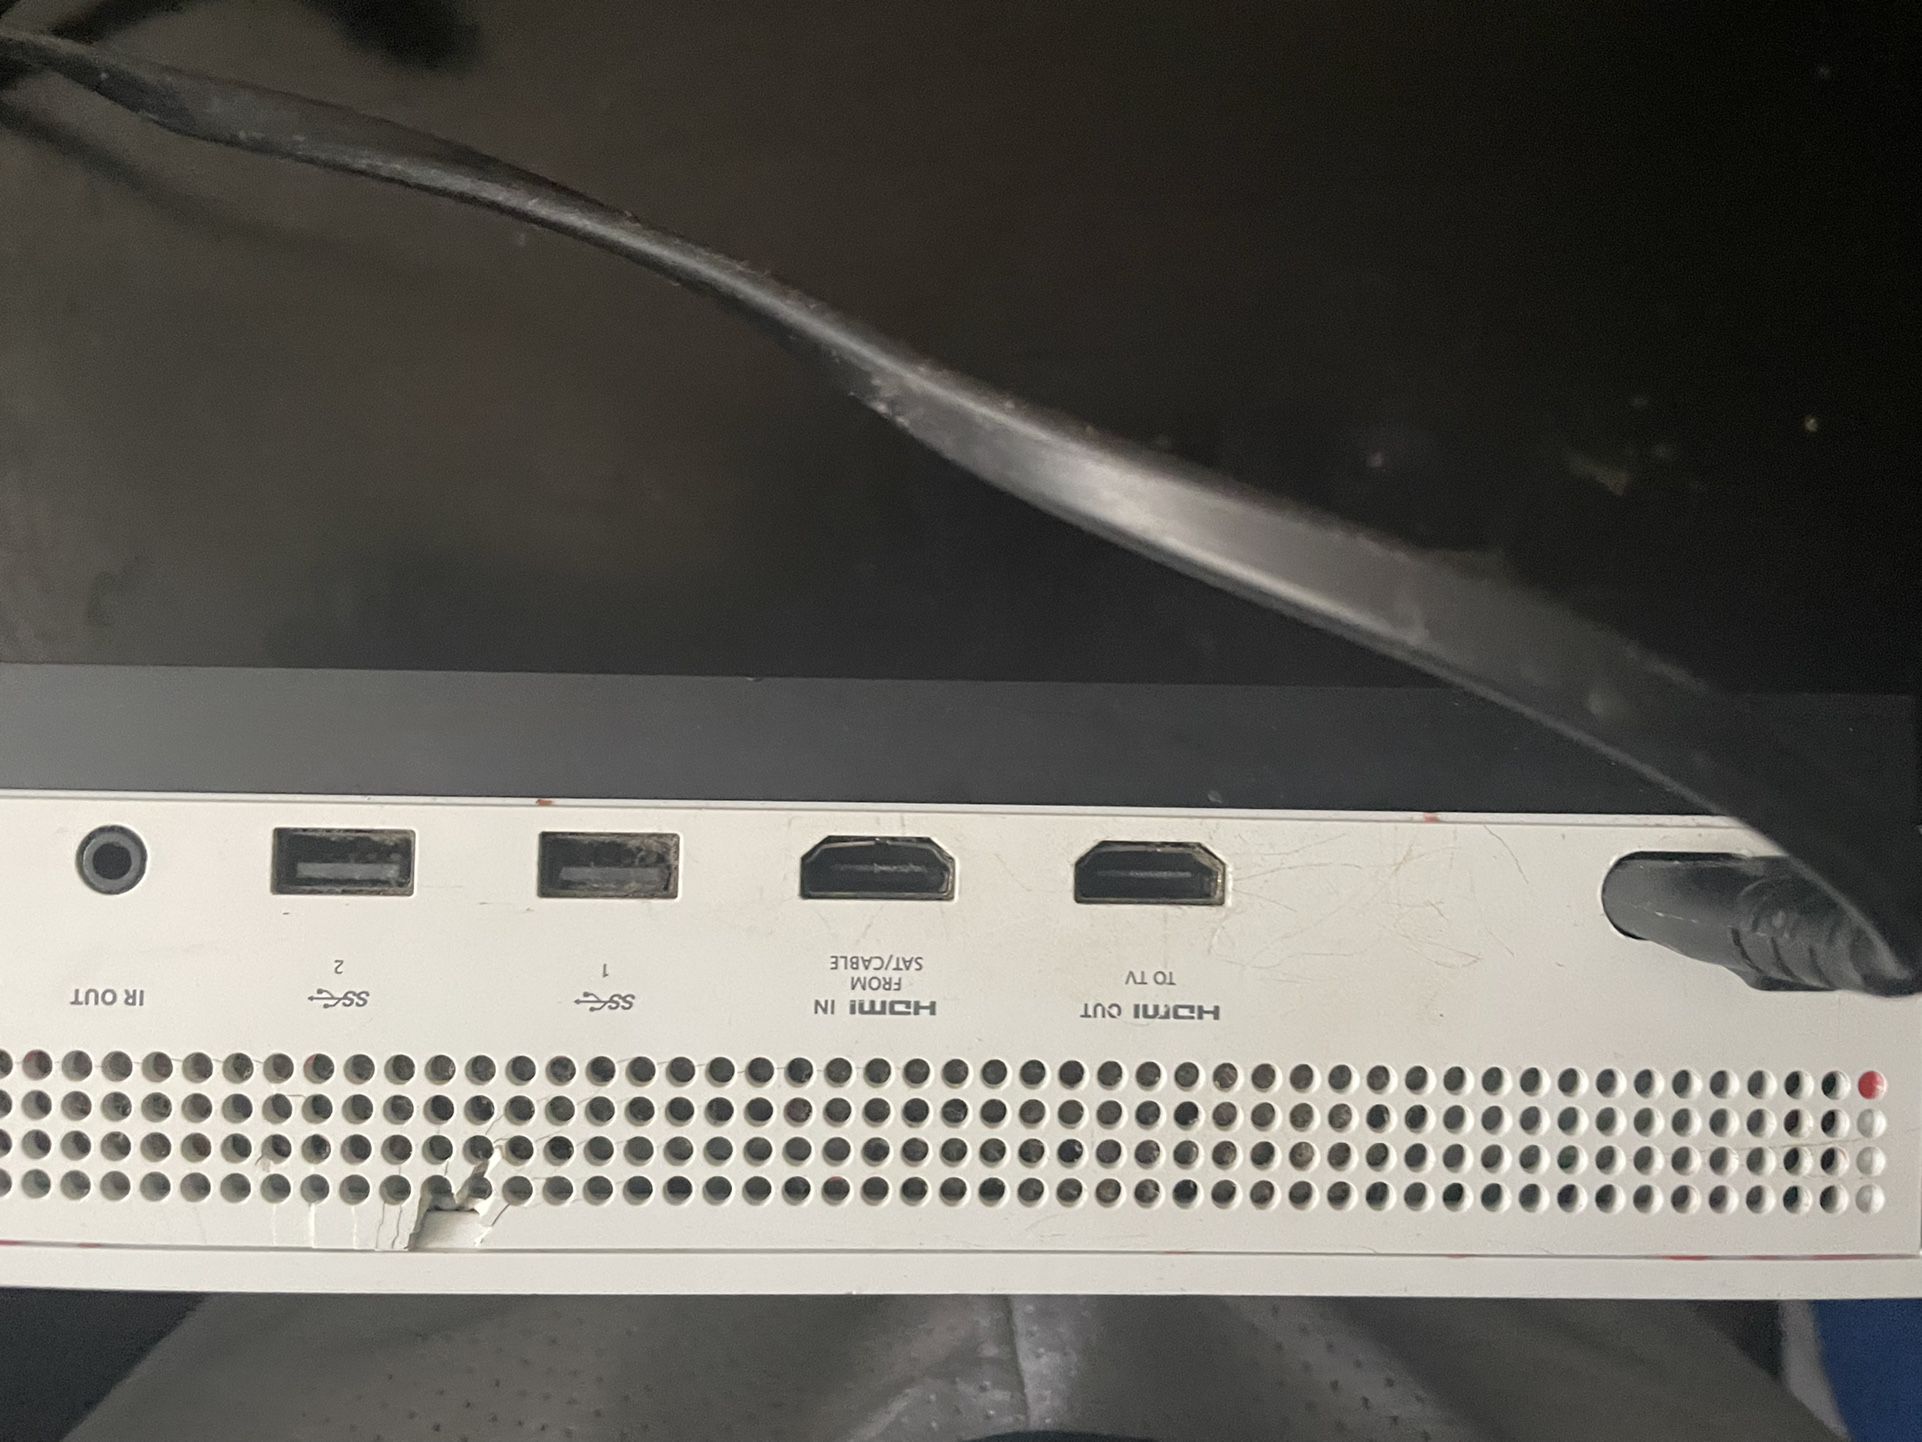 Used xbox one s (no problems) 